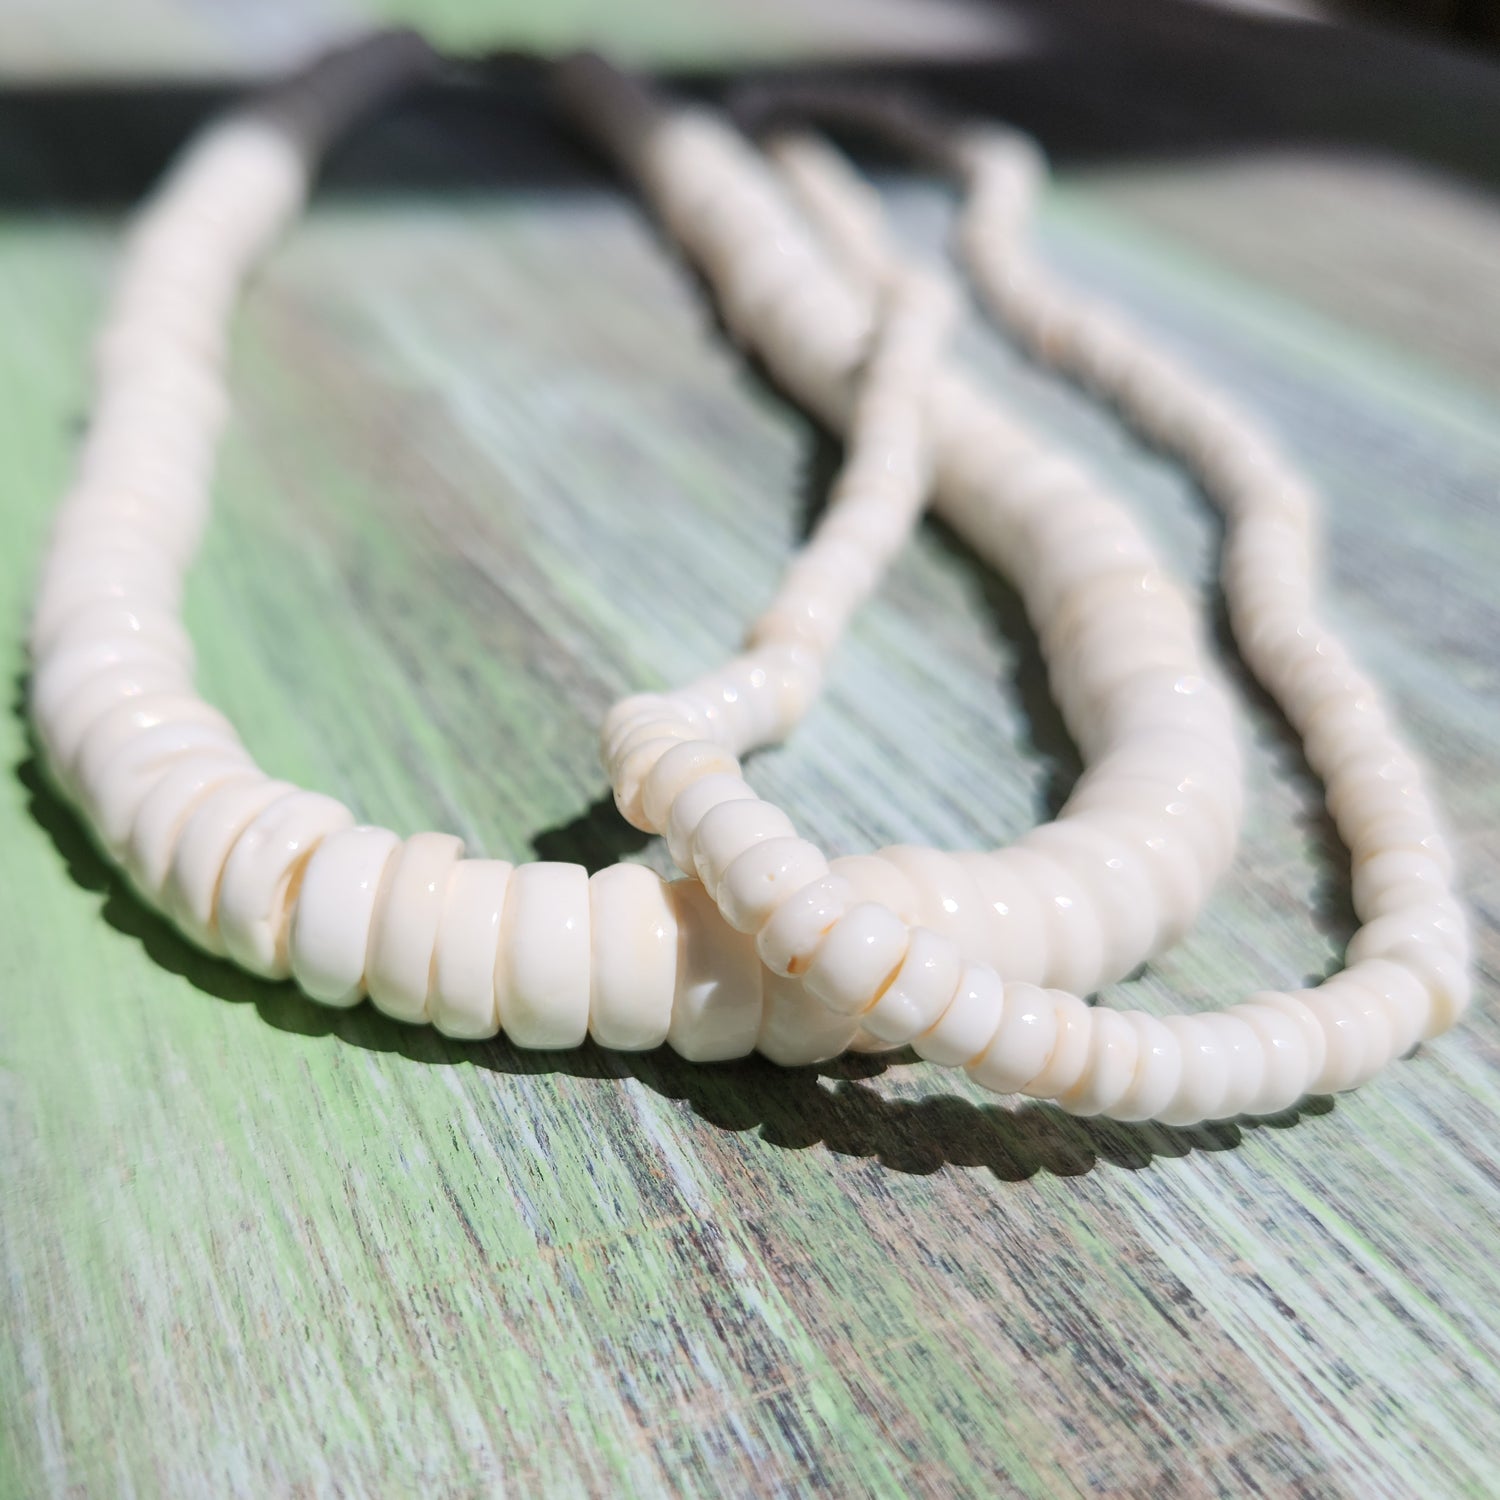 Vintage Puka Shell Necklace for Sale in Kapolei, HI - OfferUp